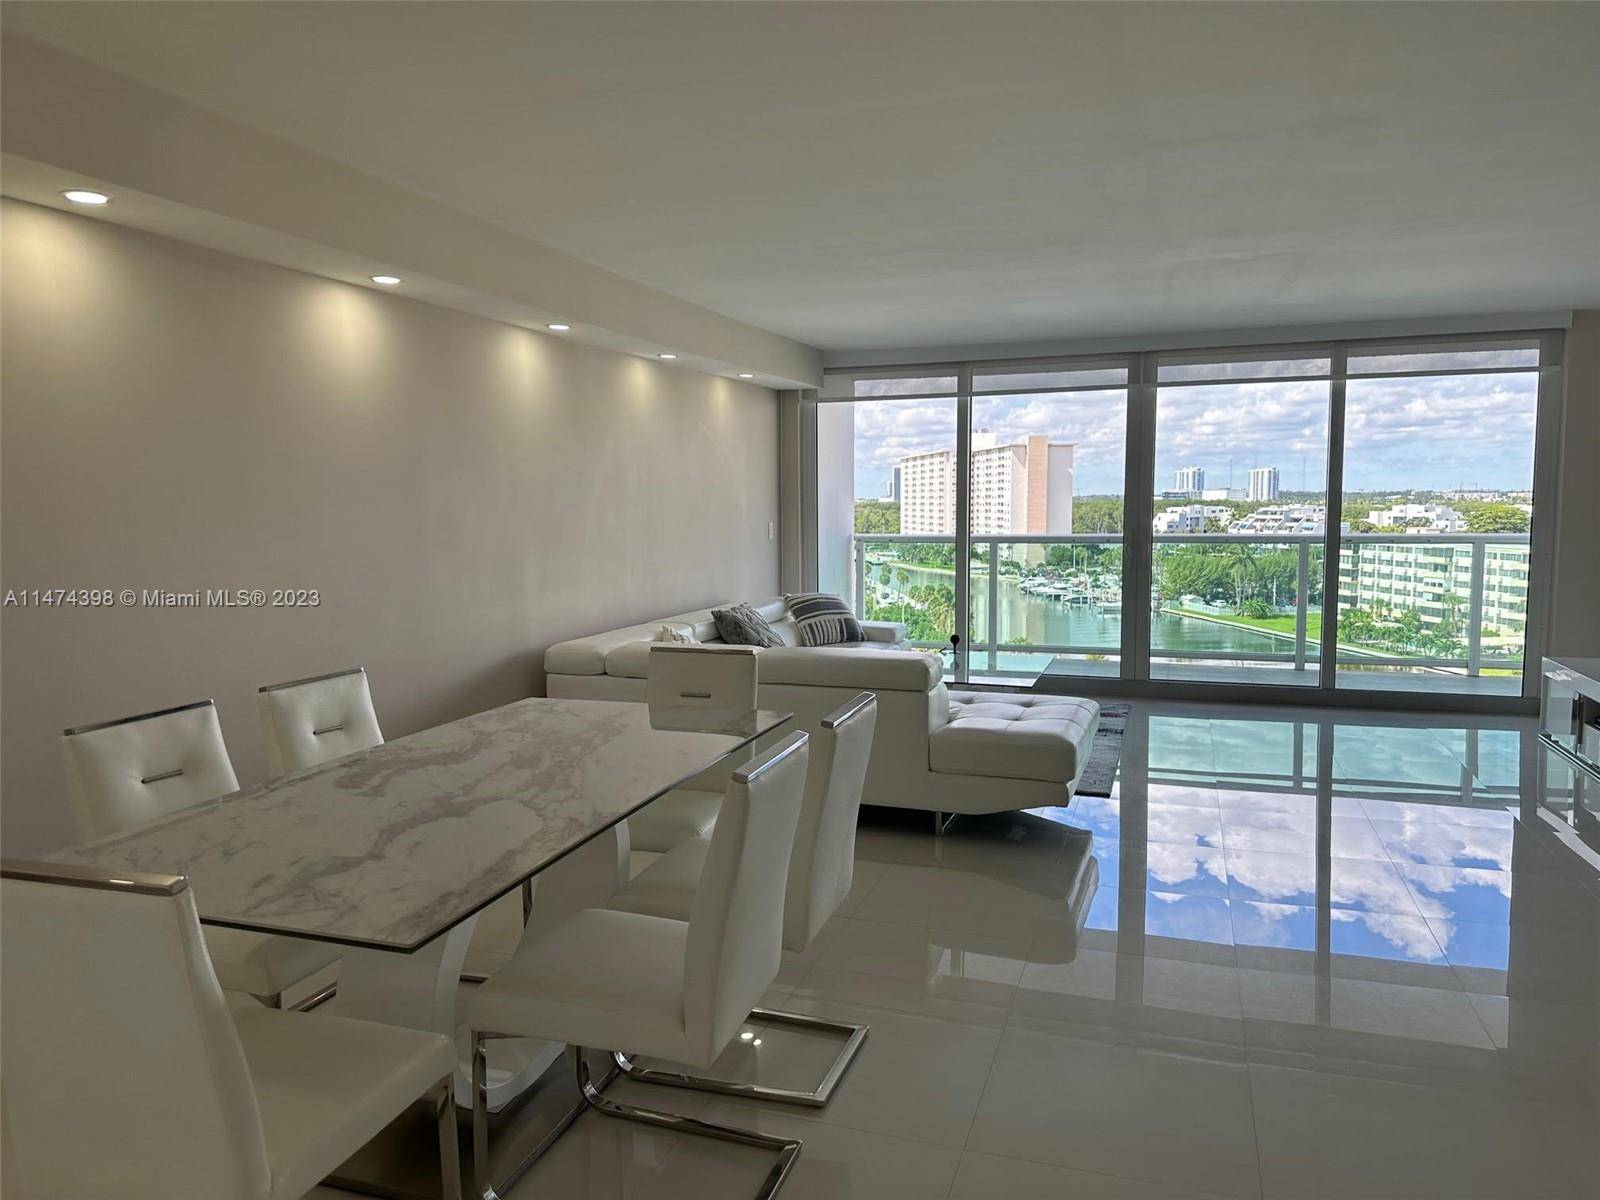 MODERN STYLE CONDO WITH WHITE PORCELAIN FLOORS ALL THROUGHOUT.